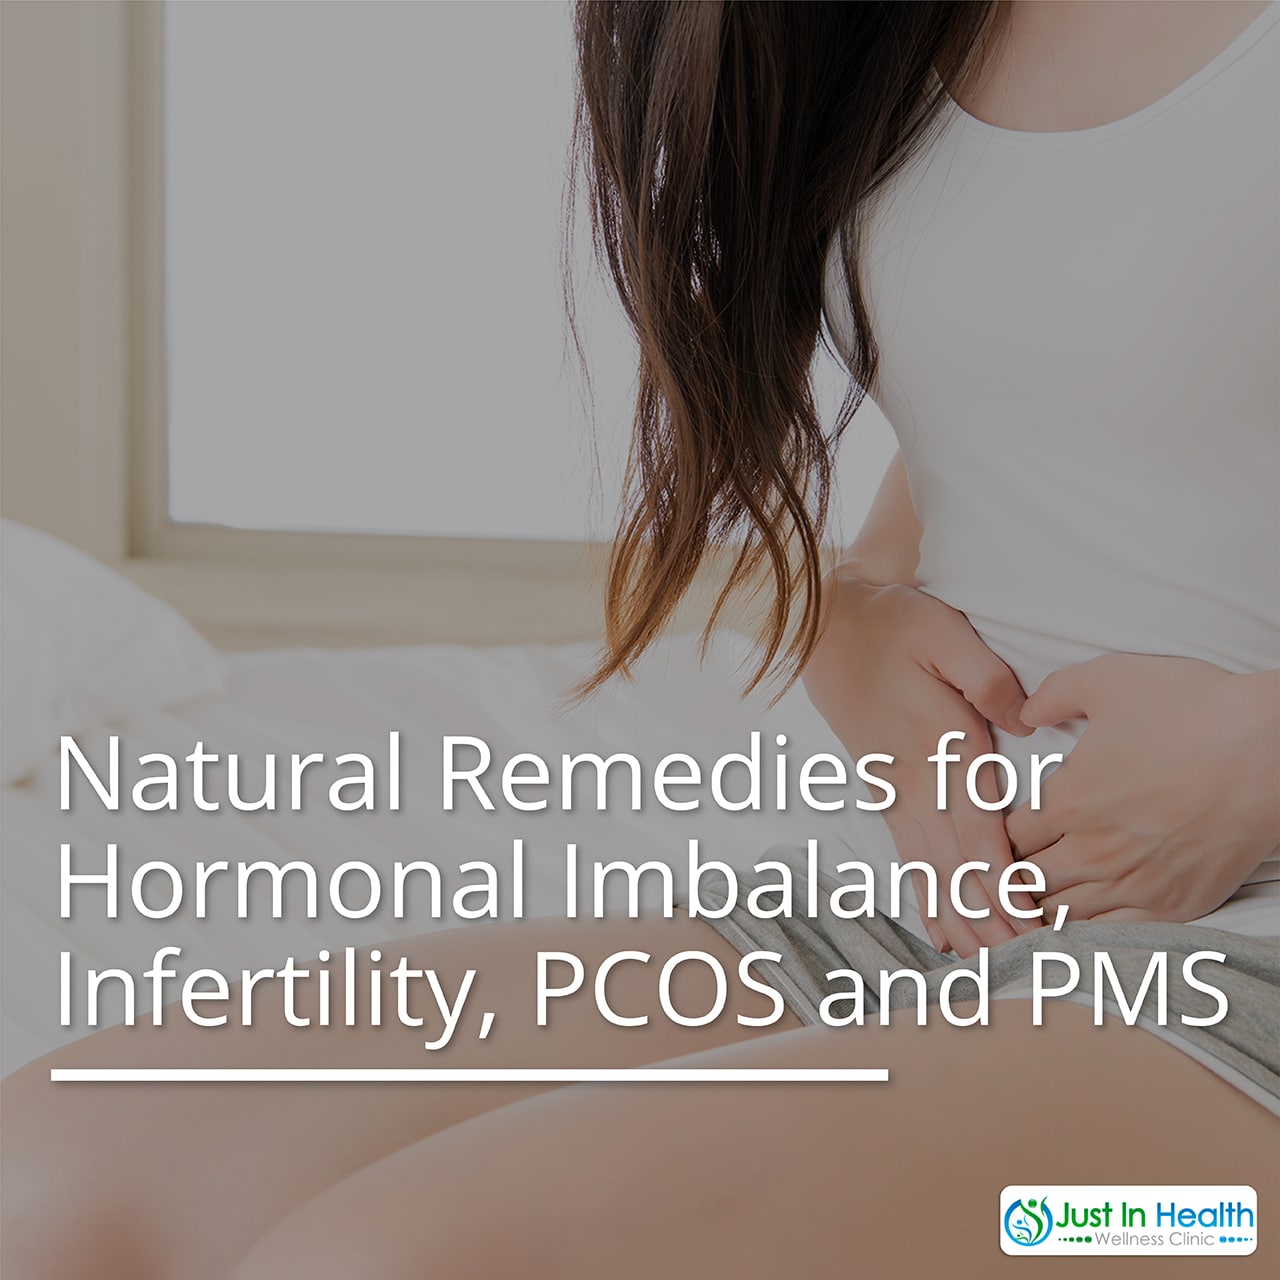 Natural Remedies for Hormonal Imbalance, Infertility, PCOS and PMS